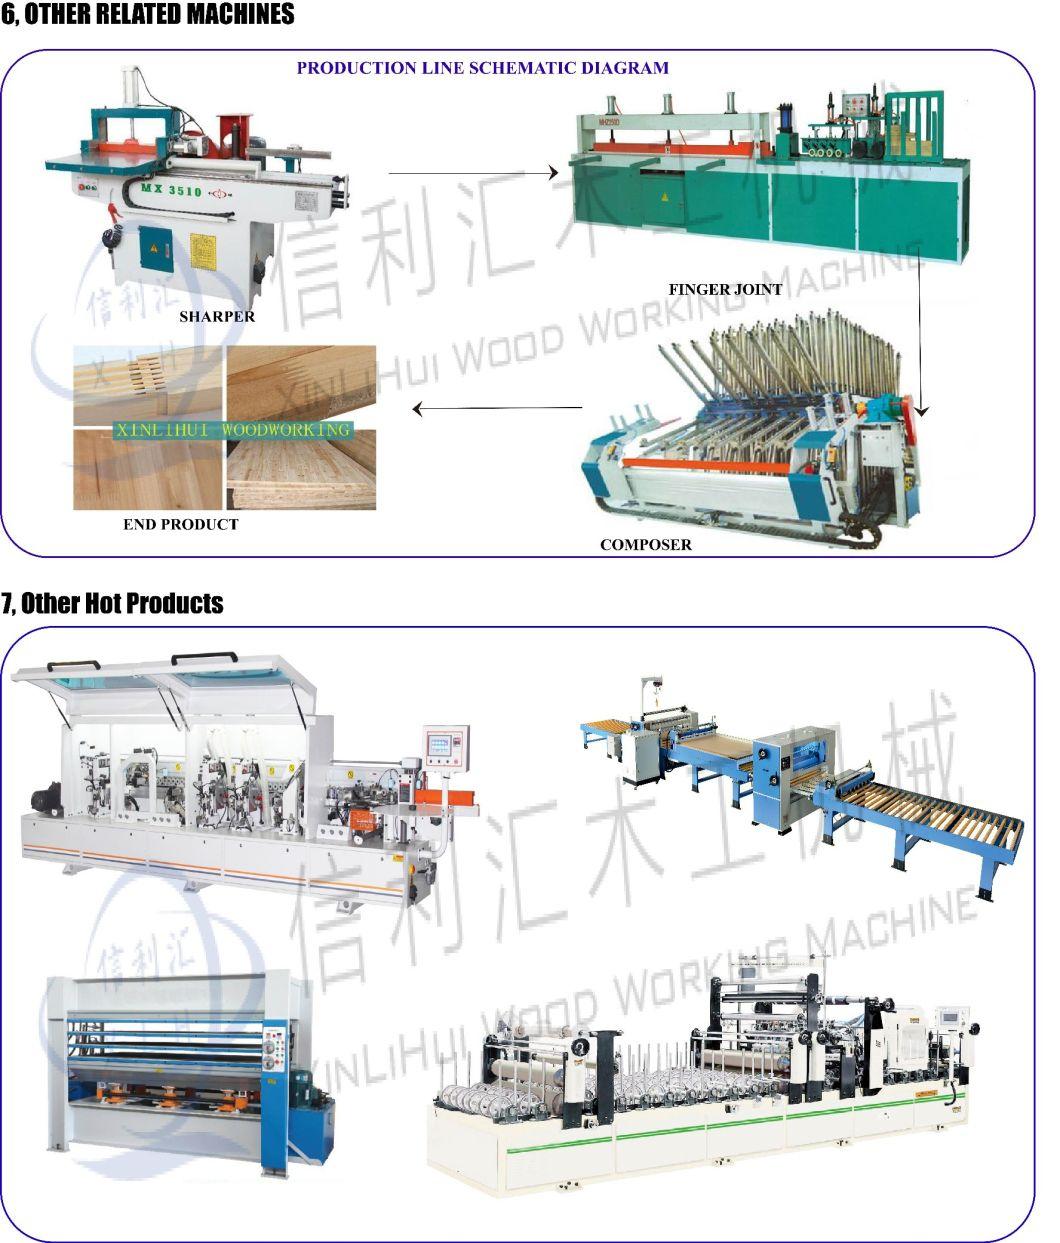 Log Multi Blade Saw / Stable Chain Saw Wood Cutting Machine/Round Wood Cutting Machine Log Multi Blade Saw Machine Process Industrial Lumber in China,